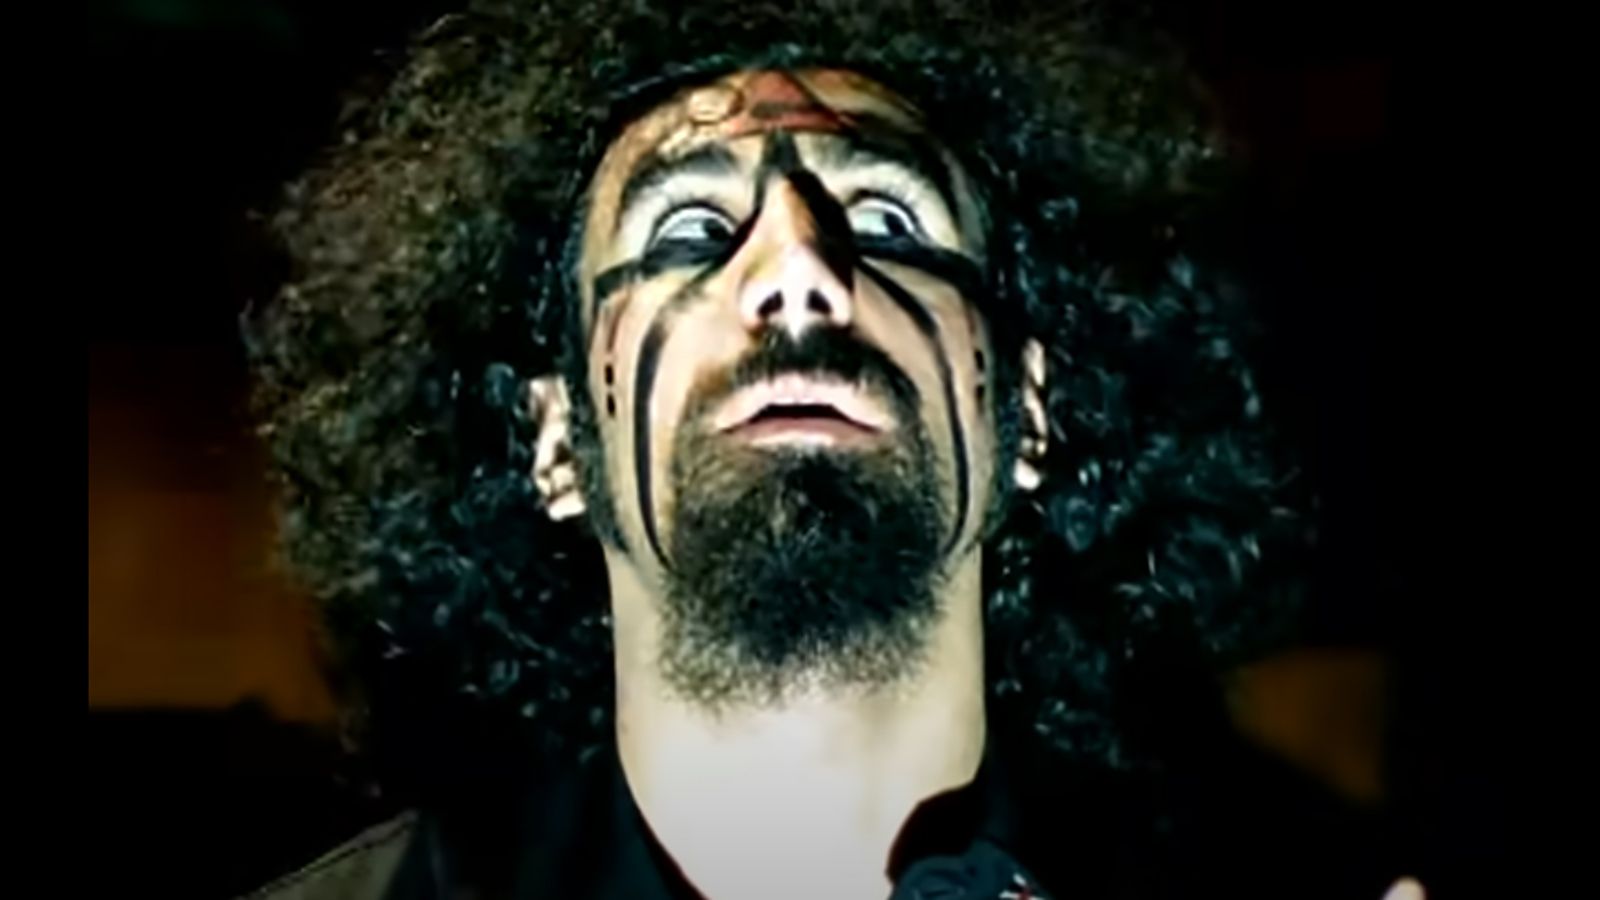 7 Things You Didn't Know About System of a Down's Self-Titled Album